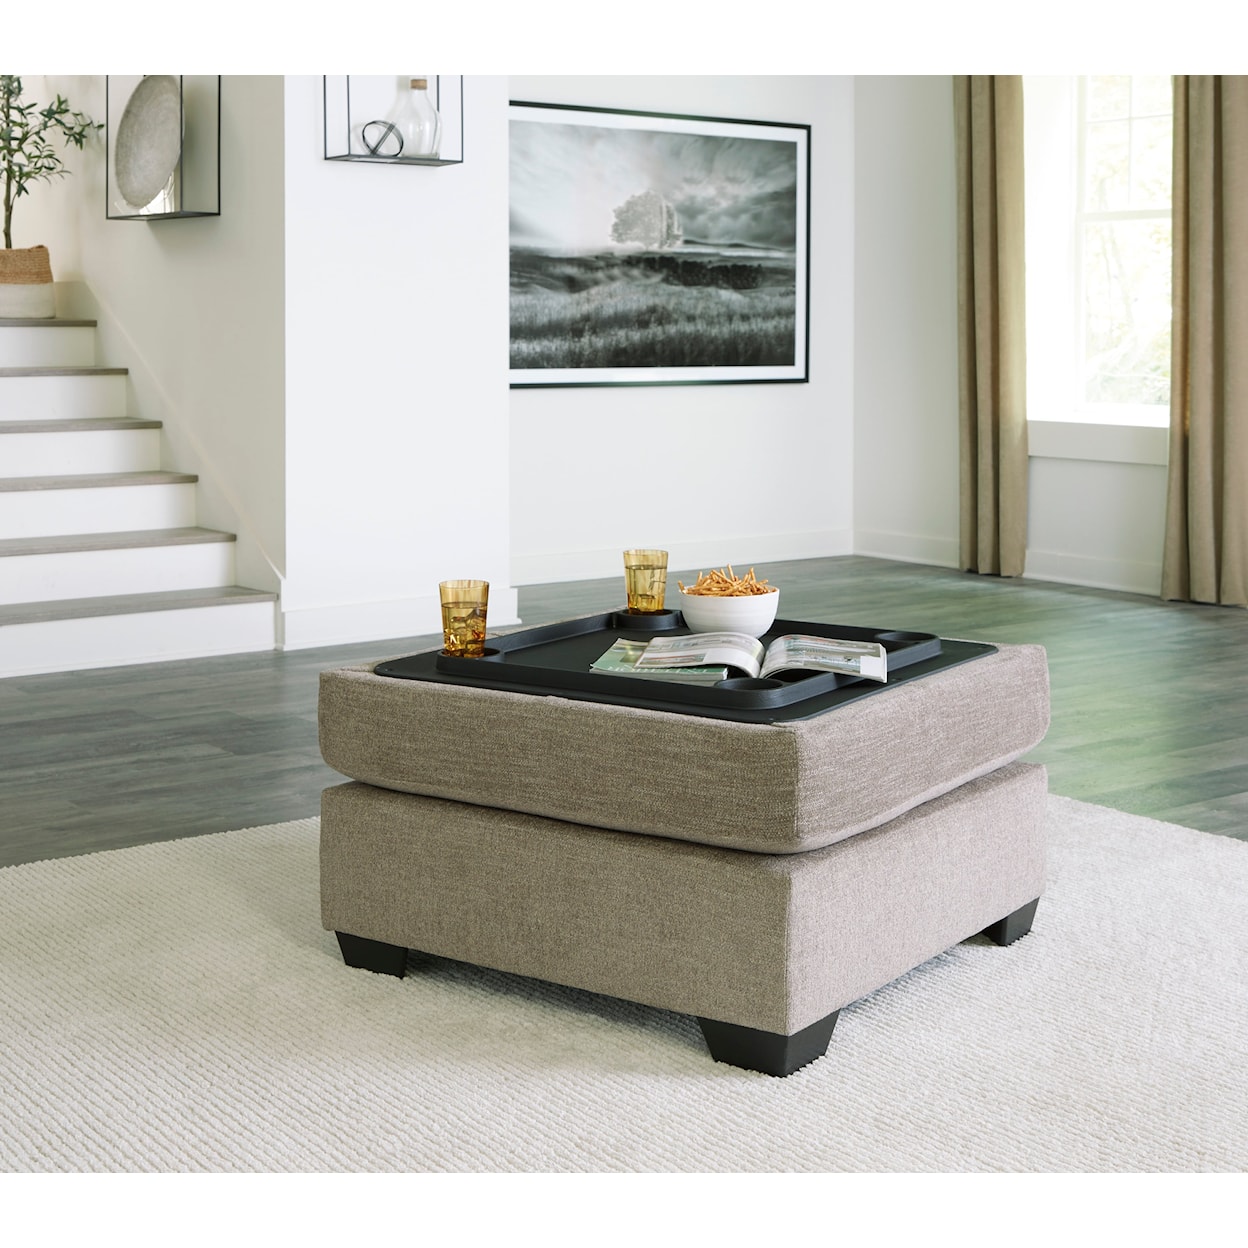 Signature Design by Ashley Creswell Ottoman With Storage